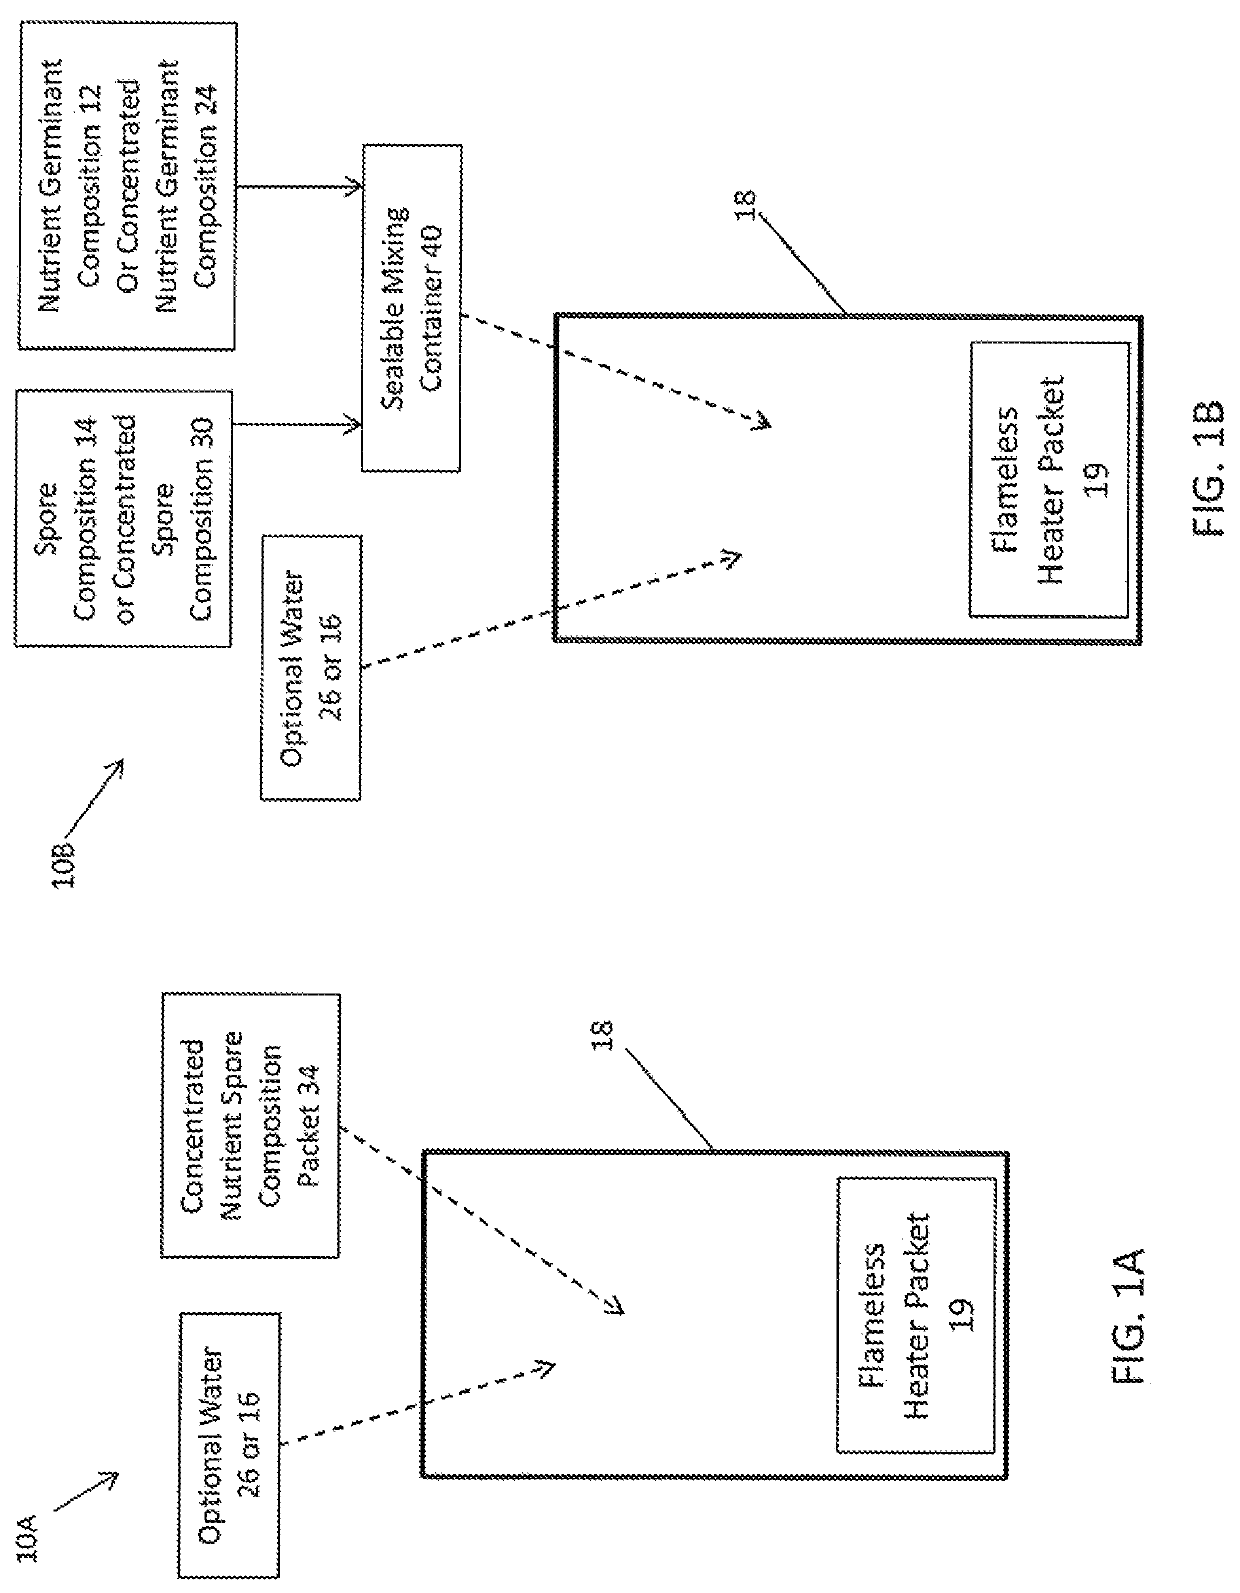 System, method, and composition for incubating spores for use in aquaculture, agriculture, wastewater, and environmental remediation applications